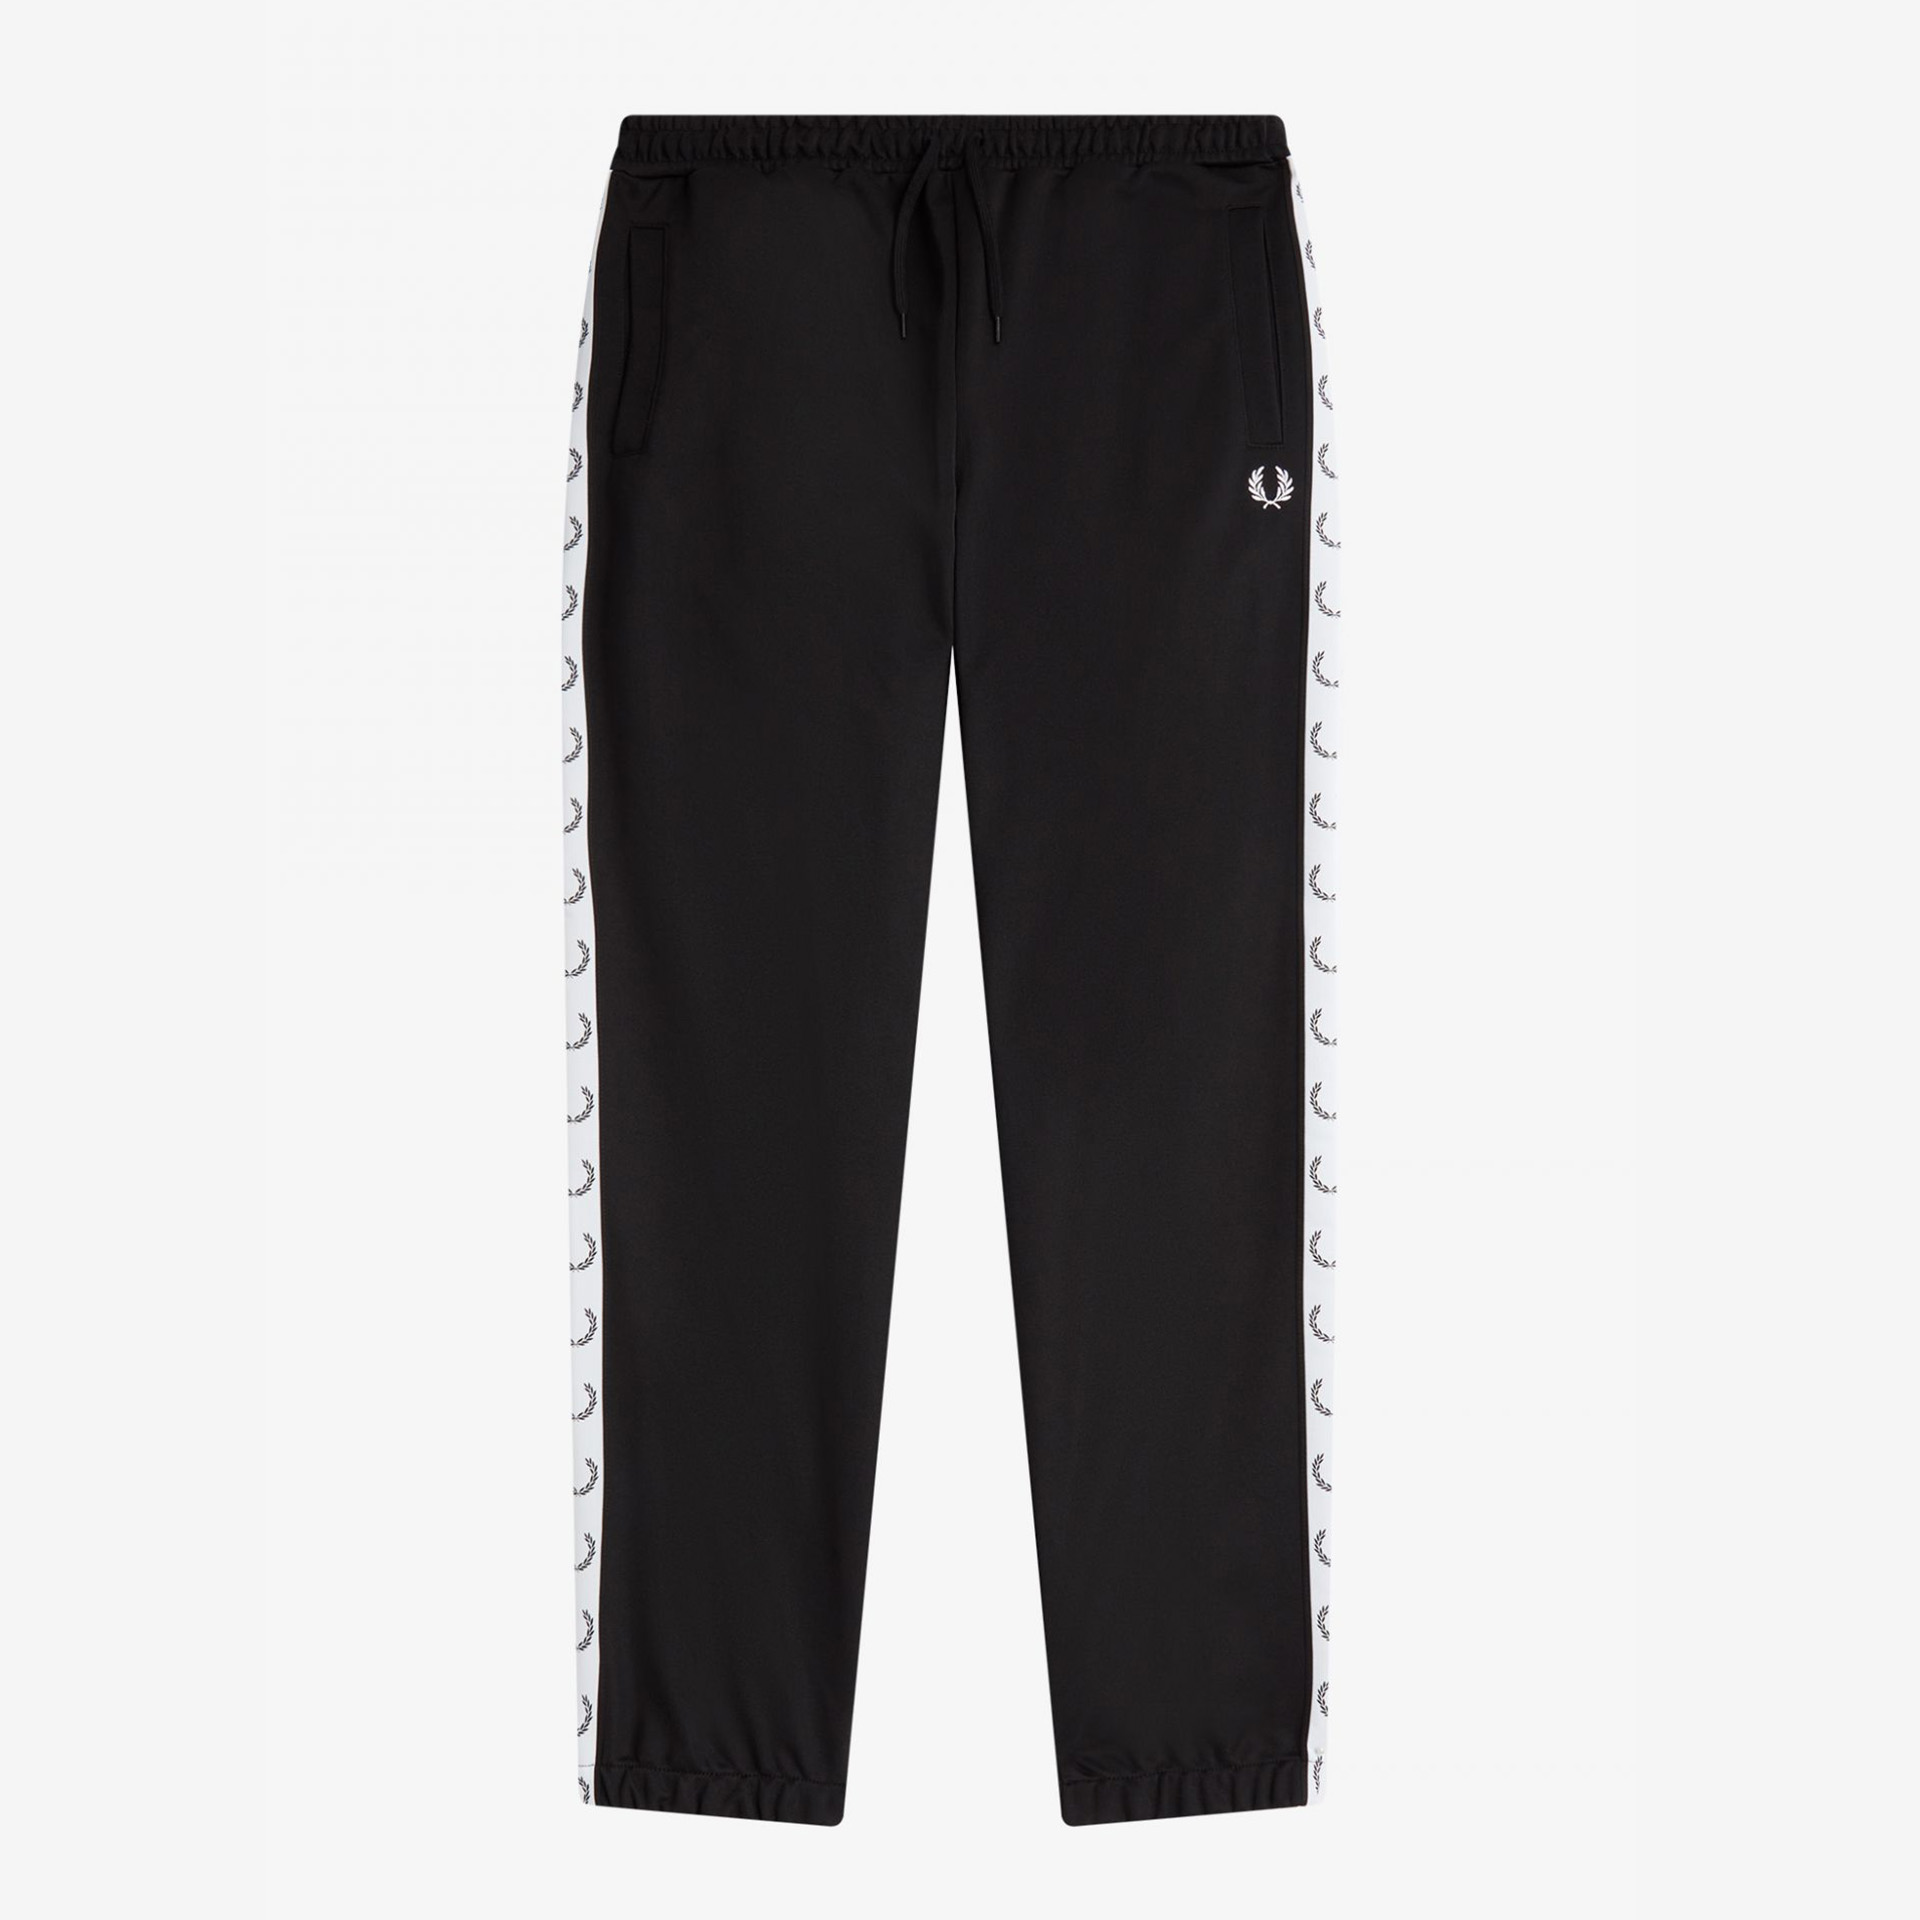 Fred Perry Taped Track Pant Black